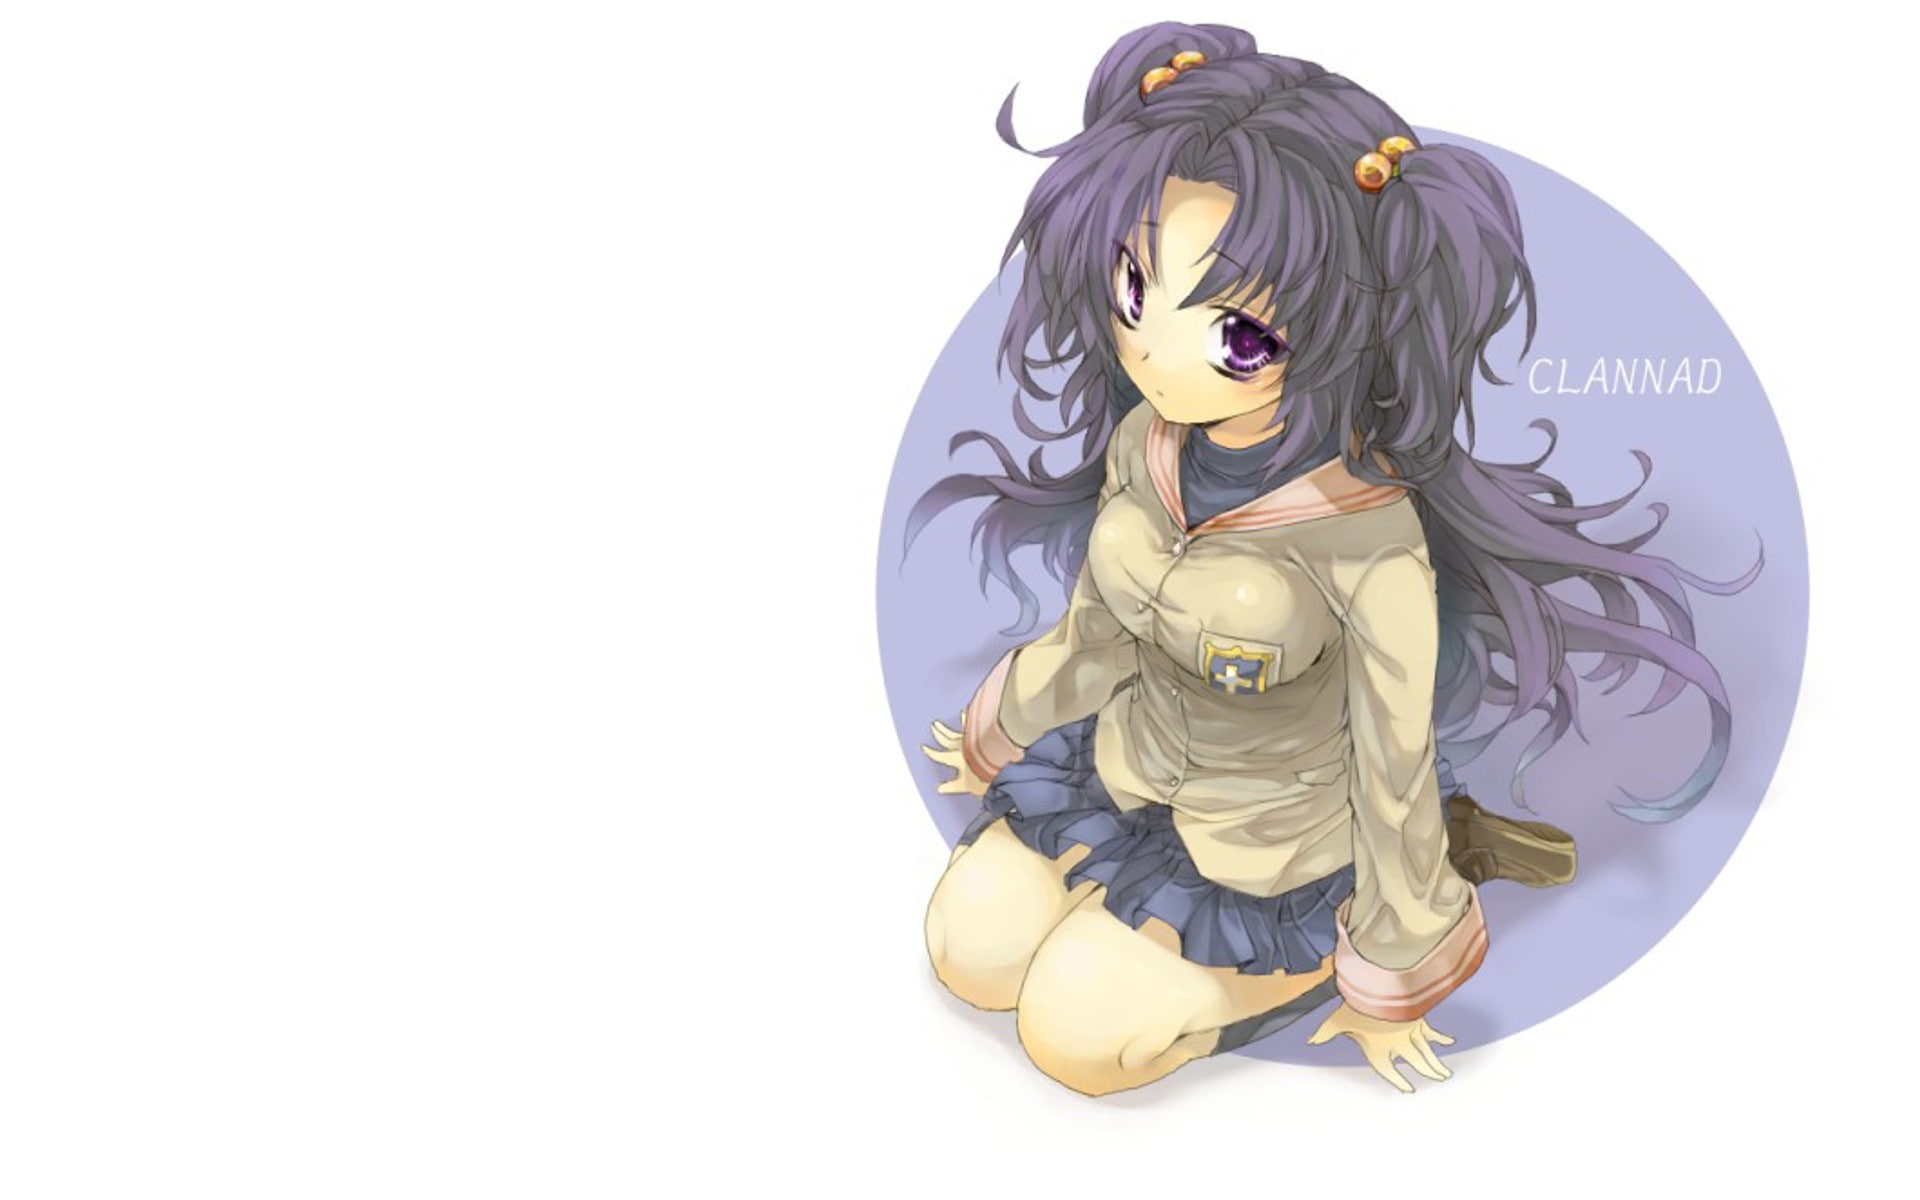 Download free Top Anime Clannad Family Wallpaper - MrWallpaper.com